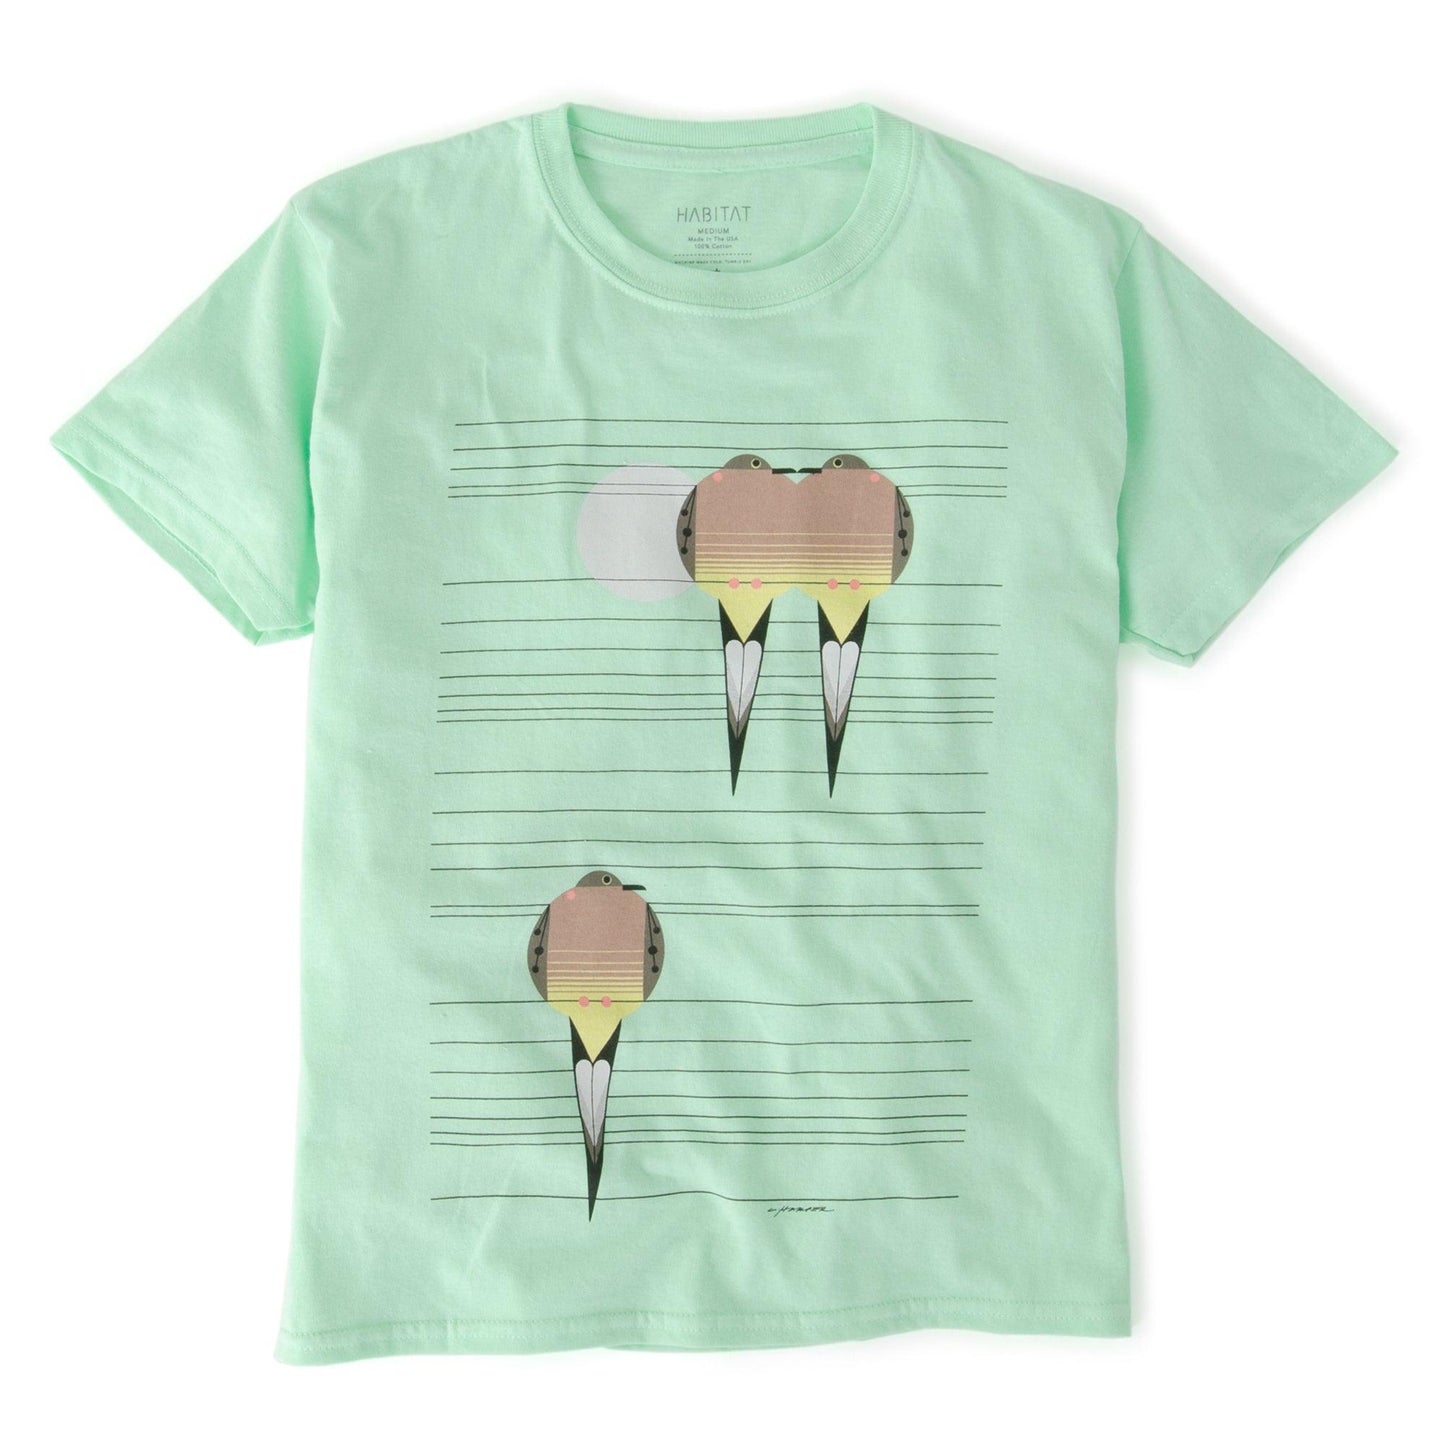 Charley Harper Bird On A Wire Youth T-Shirt